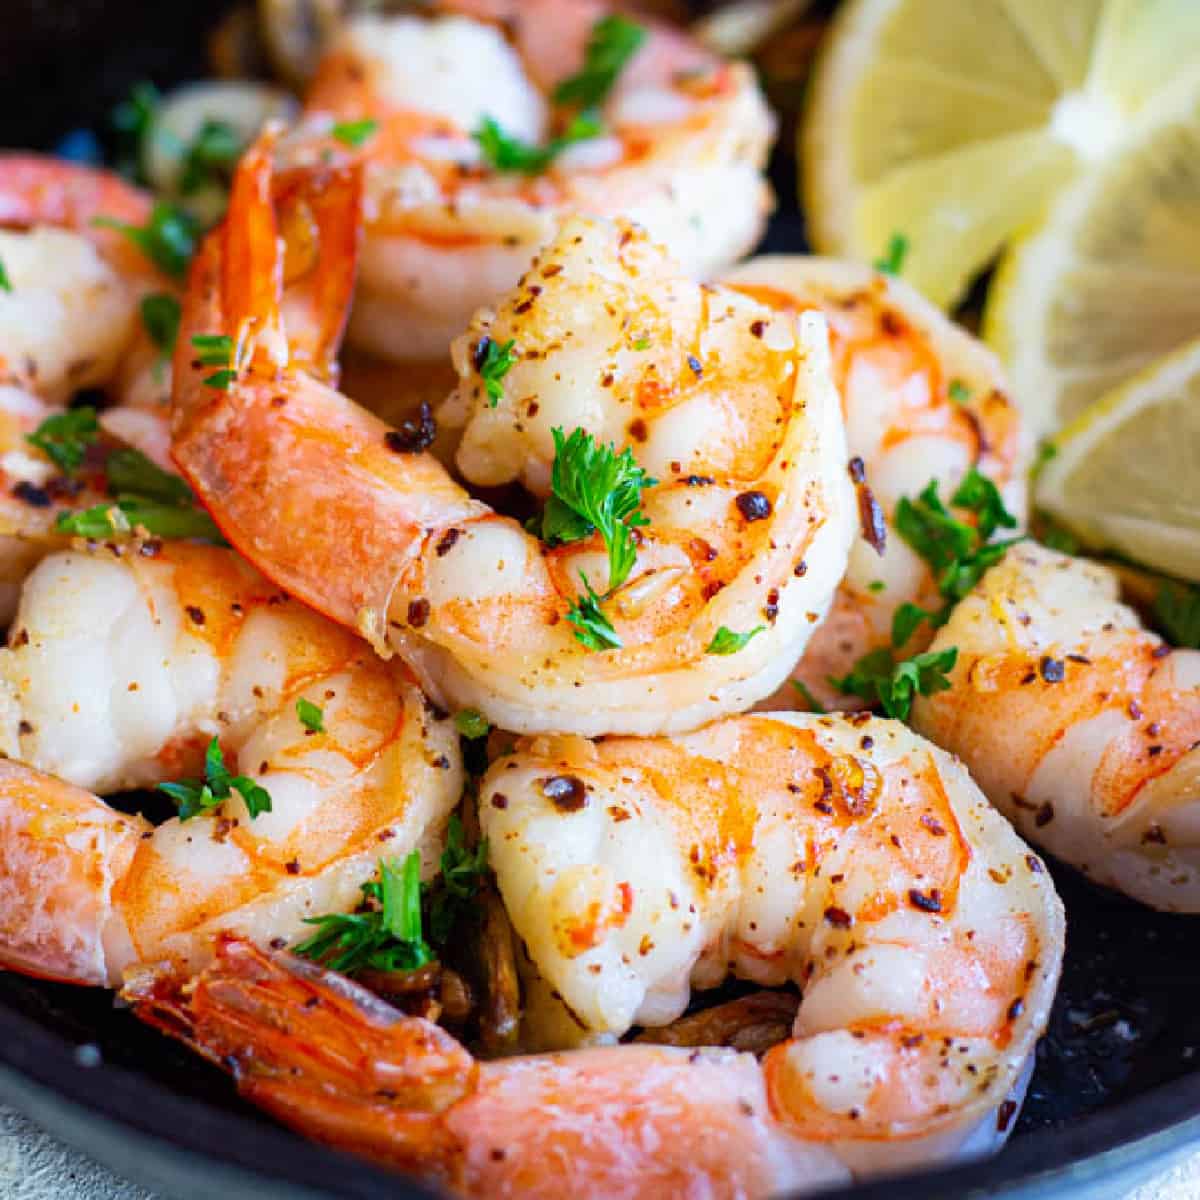 Gambas al ajillo, also known as garlic shrimp, is a classic Spanish tapa that's ready in 10 minutes. Delicious shrimp cooked in olive oil with a lot of garlic, it can’t get any better! 
